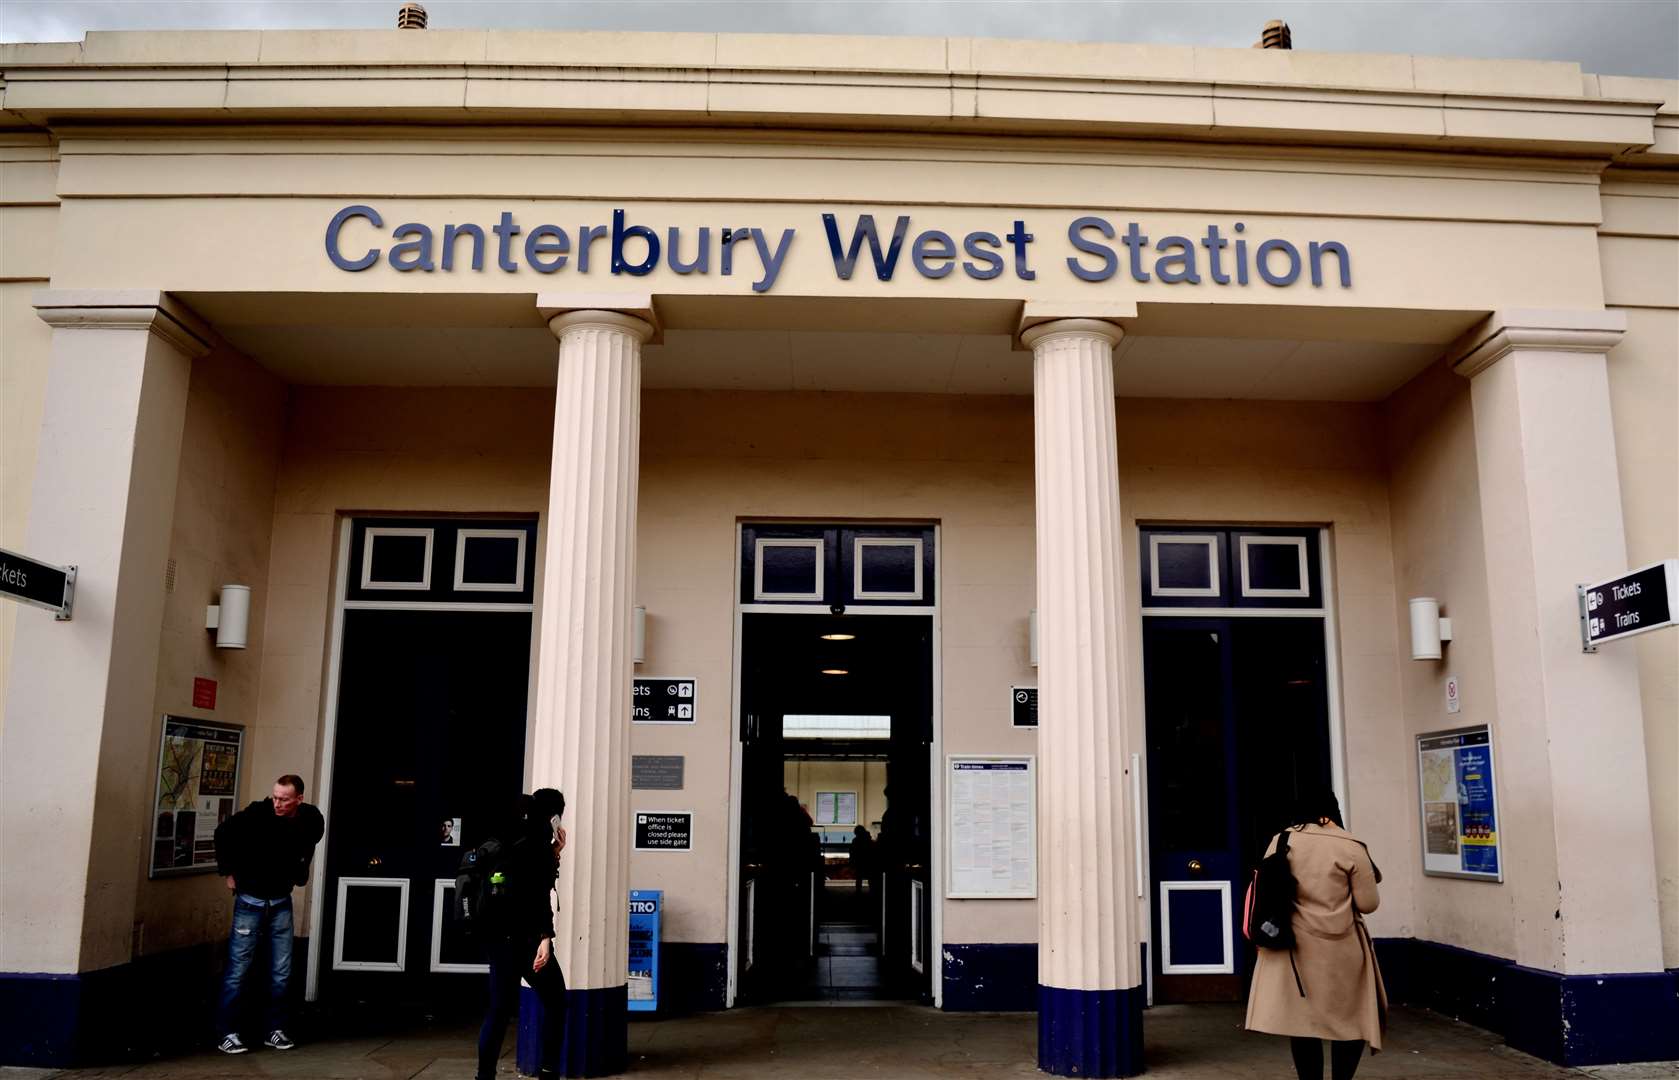 The incident happened at Canterbury West station